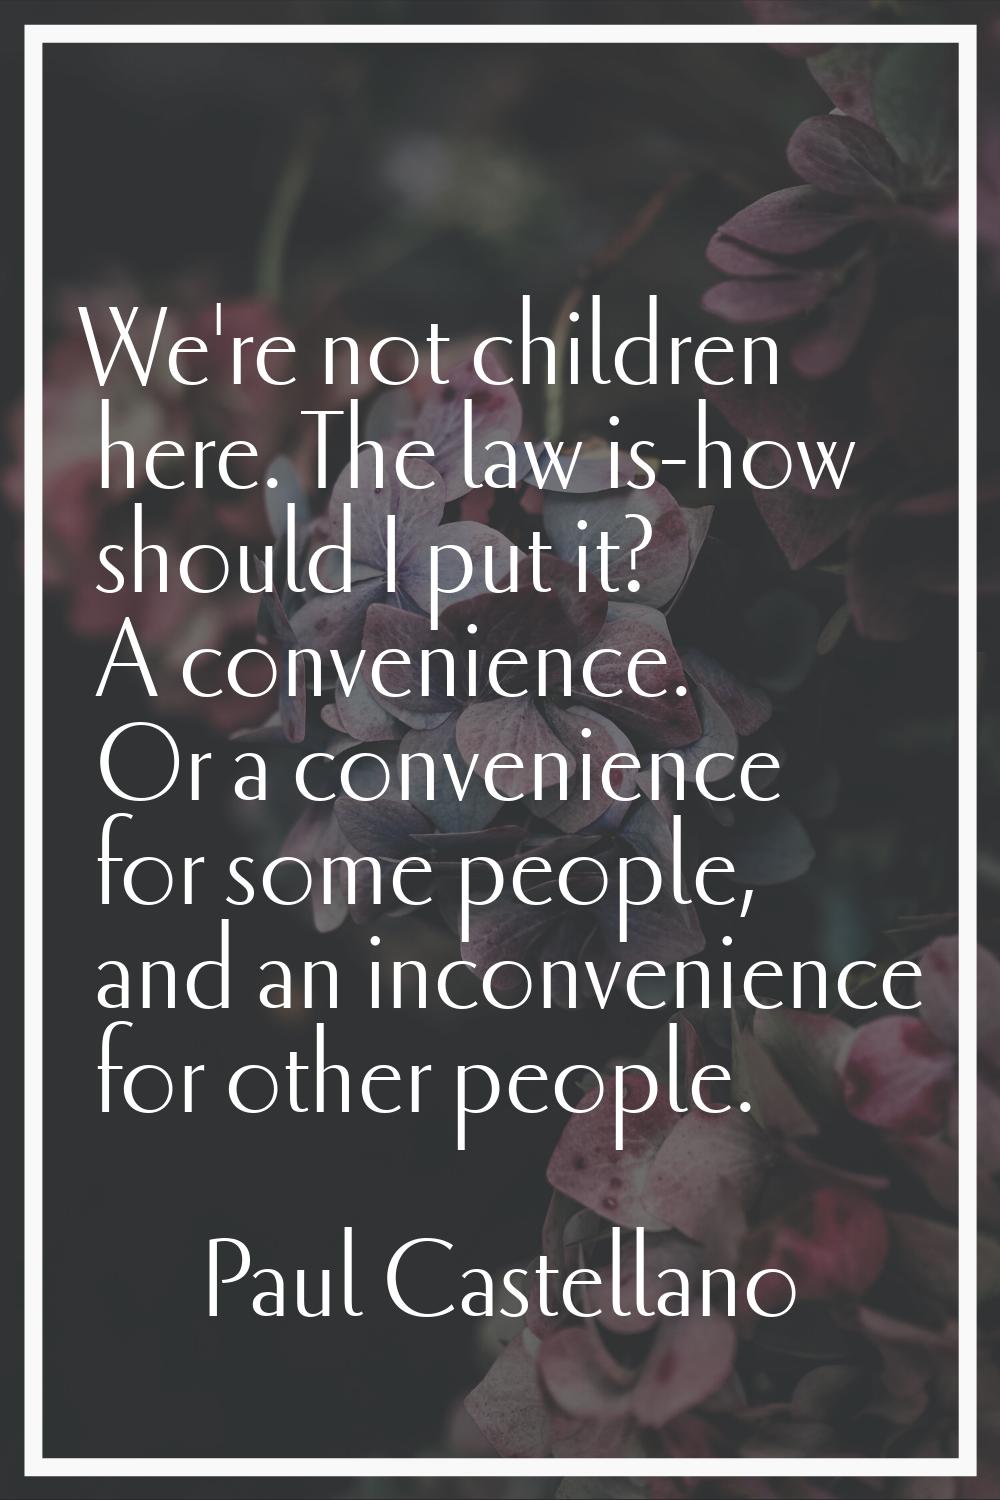 We're not children here. The law is-how should I put it? A convenience. Or a convenience for some p